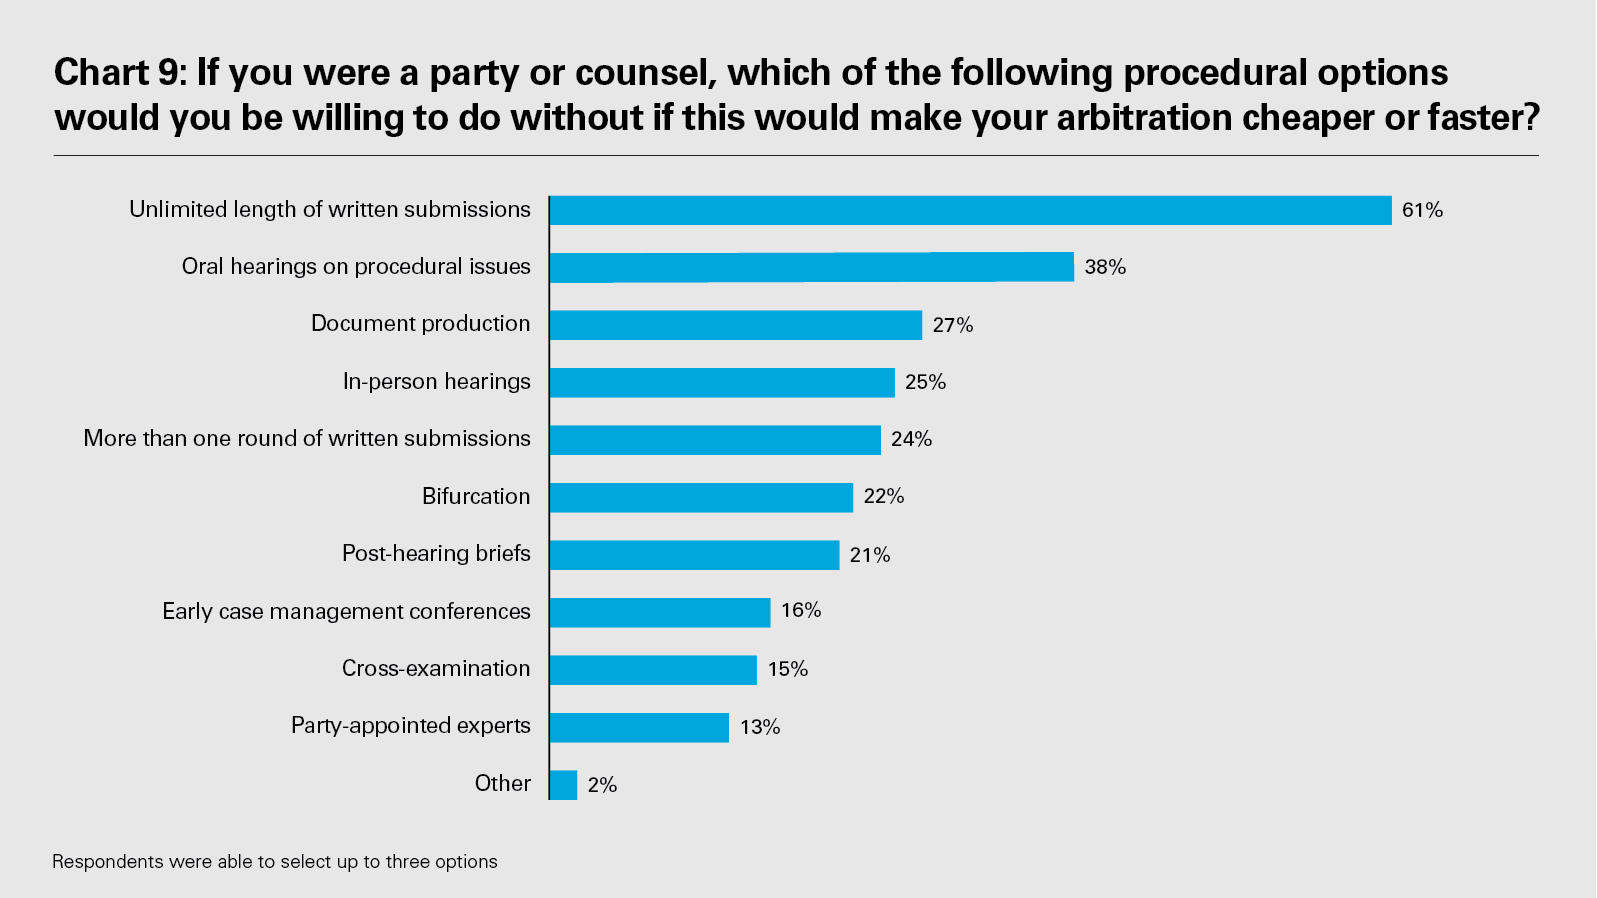 Chart 9: If you were a party or counsel, which of the following procedural options would you be willing to do without if this would make your arbitration cheaper or faster? (PDF)